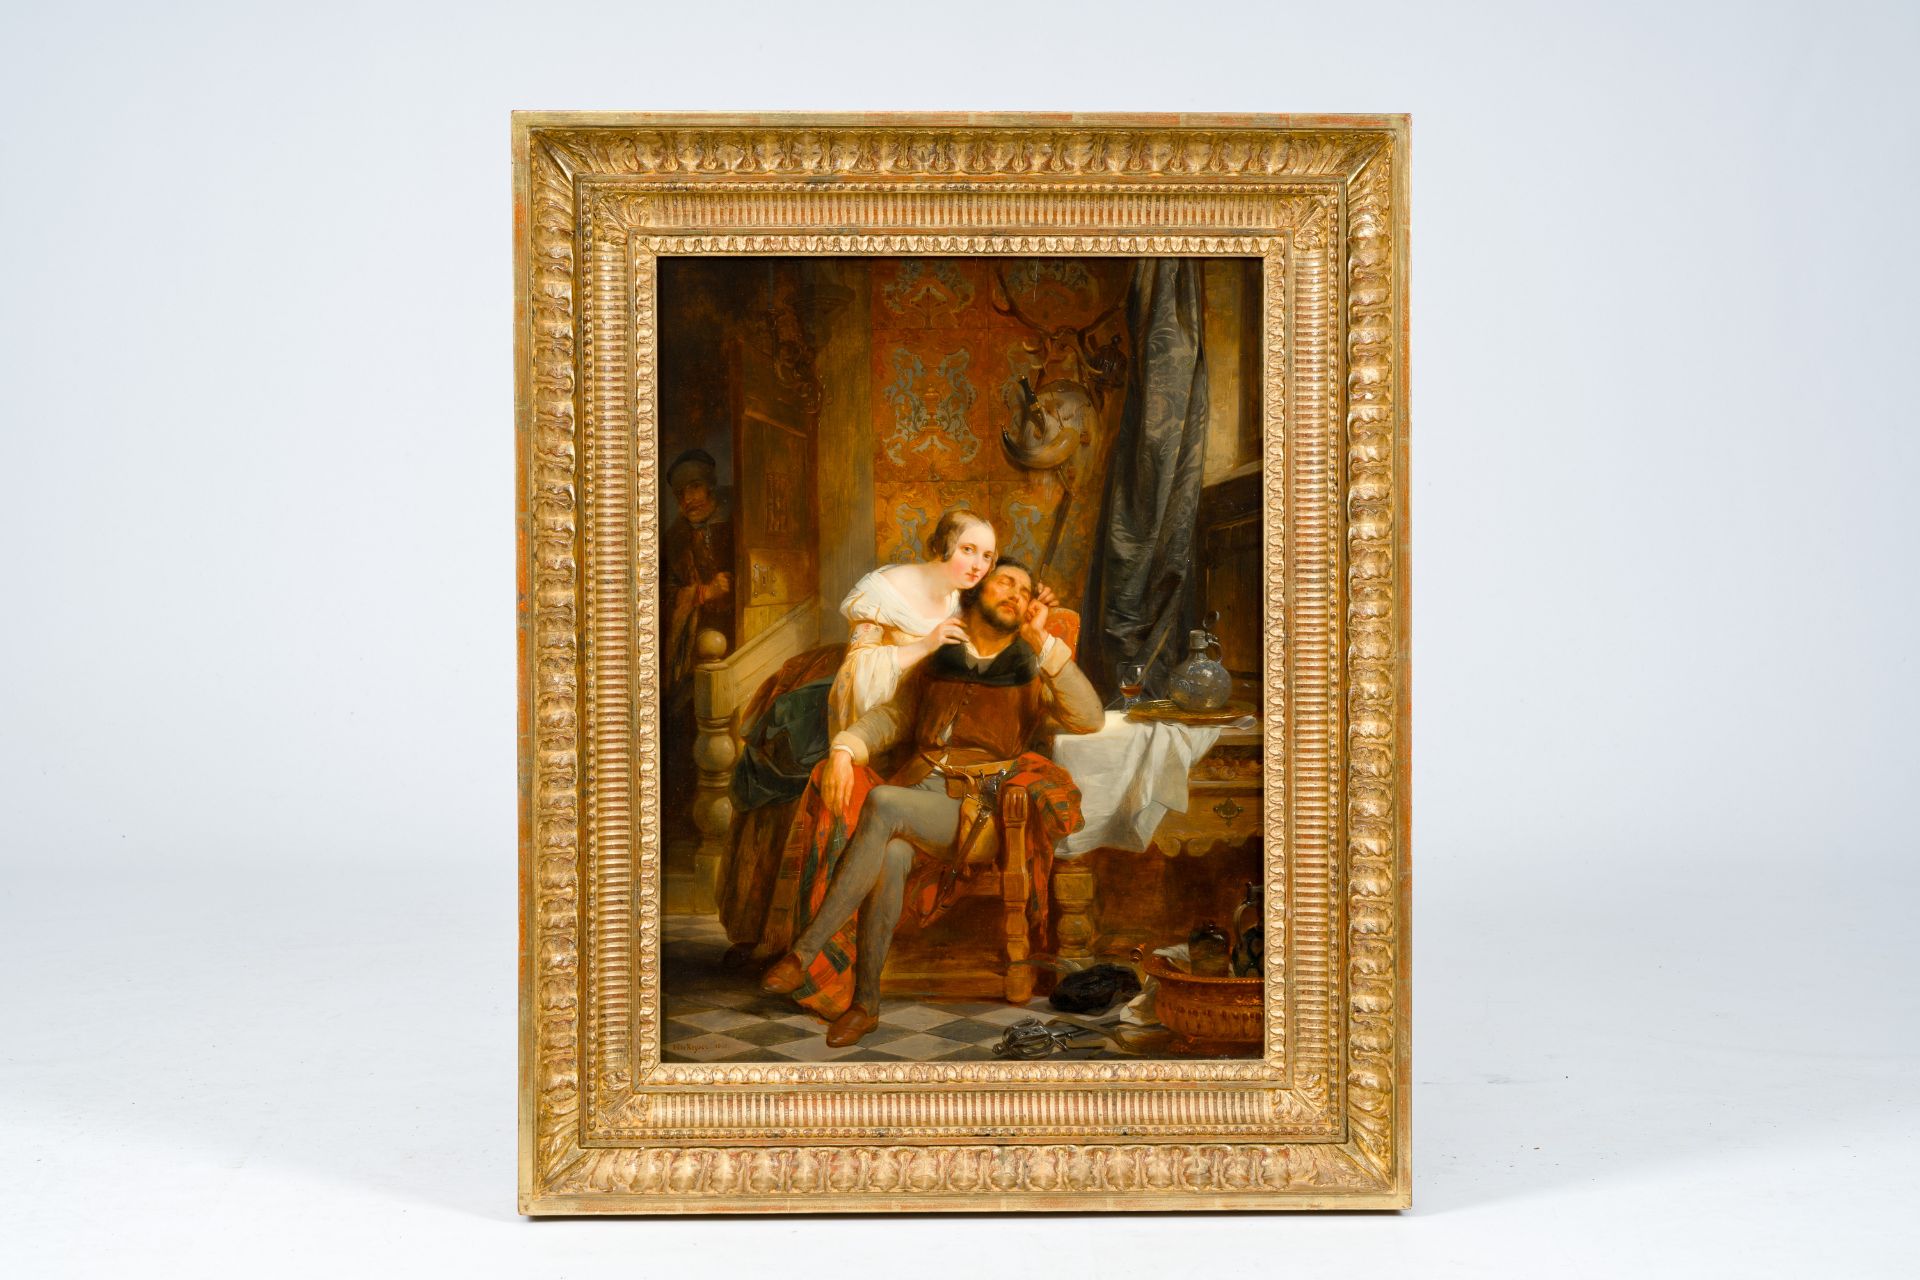 Nicaise De Keyser (1813-1887): The unguarded moment, oil on panel, dated 1842 - Image 2 of 5